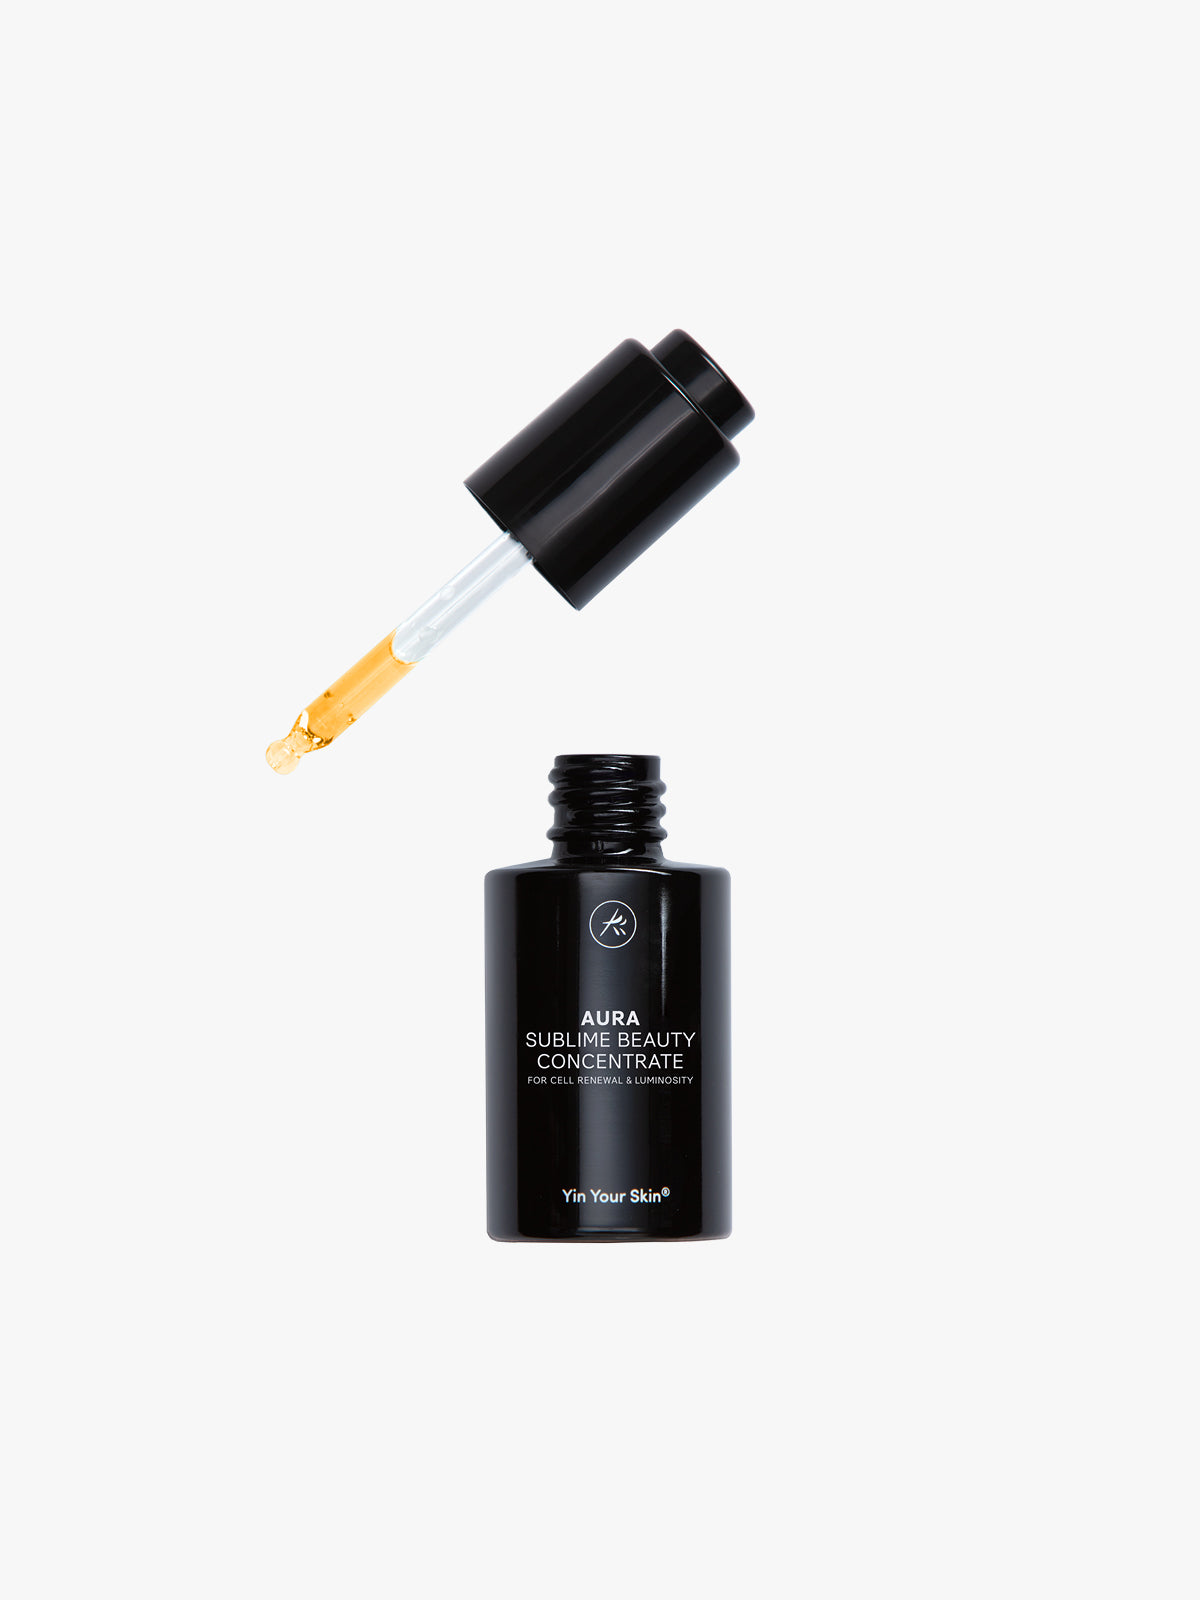 AURA Sublime Beauty Concentrate for Cell Renewal & Luminosity